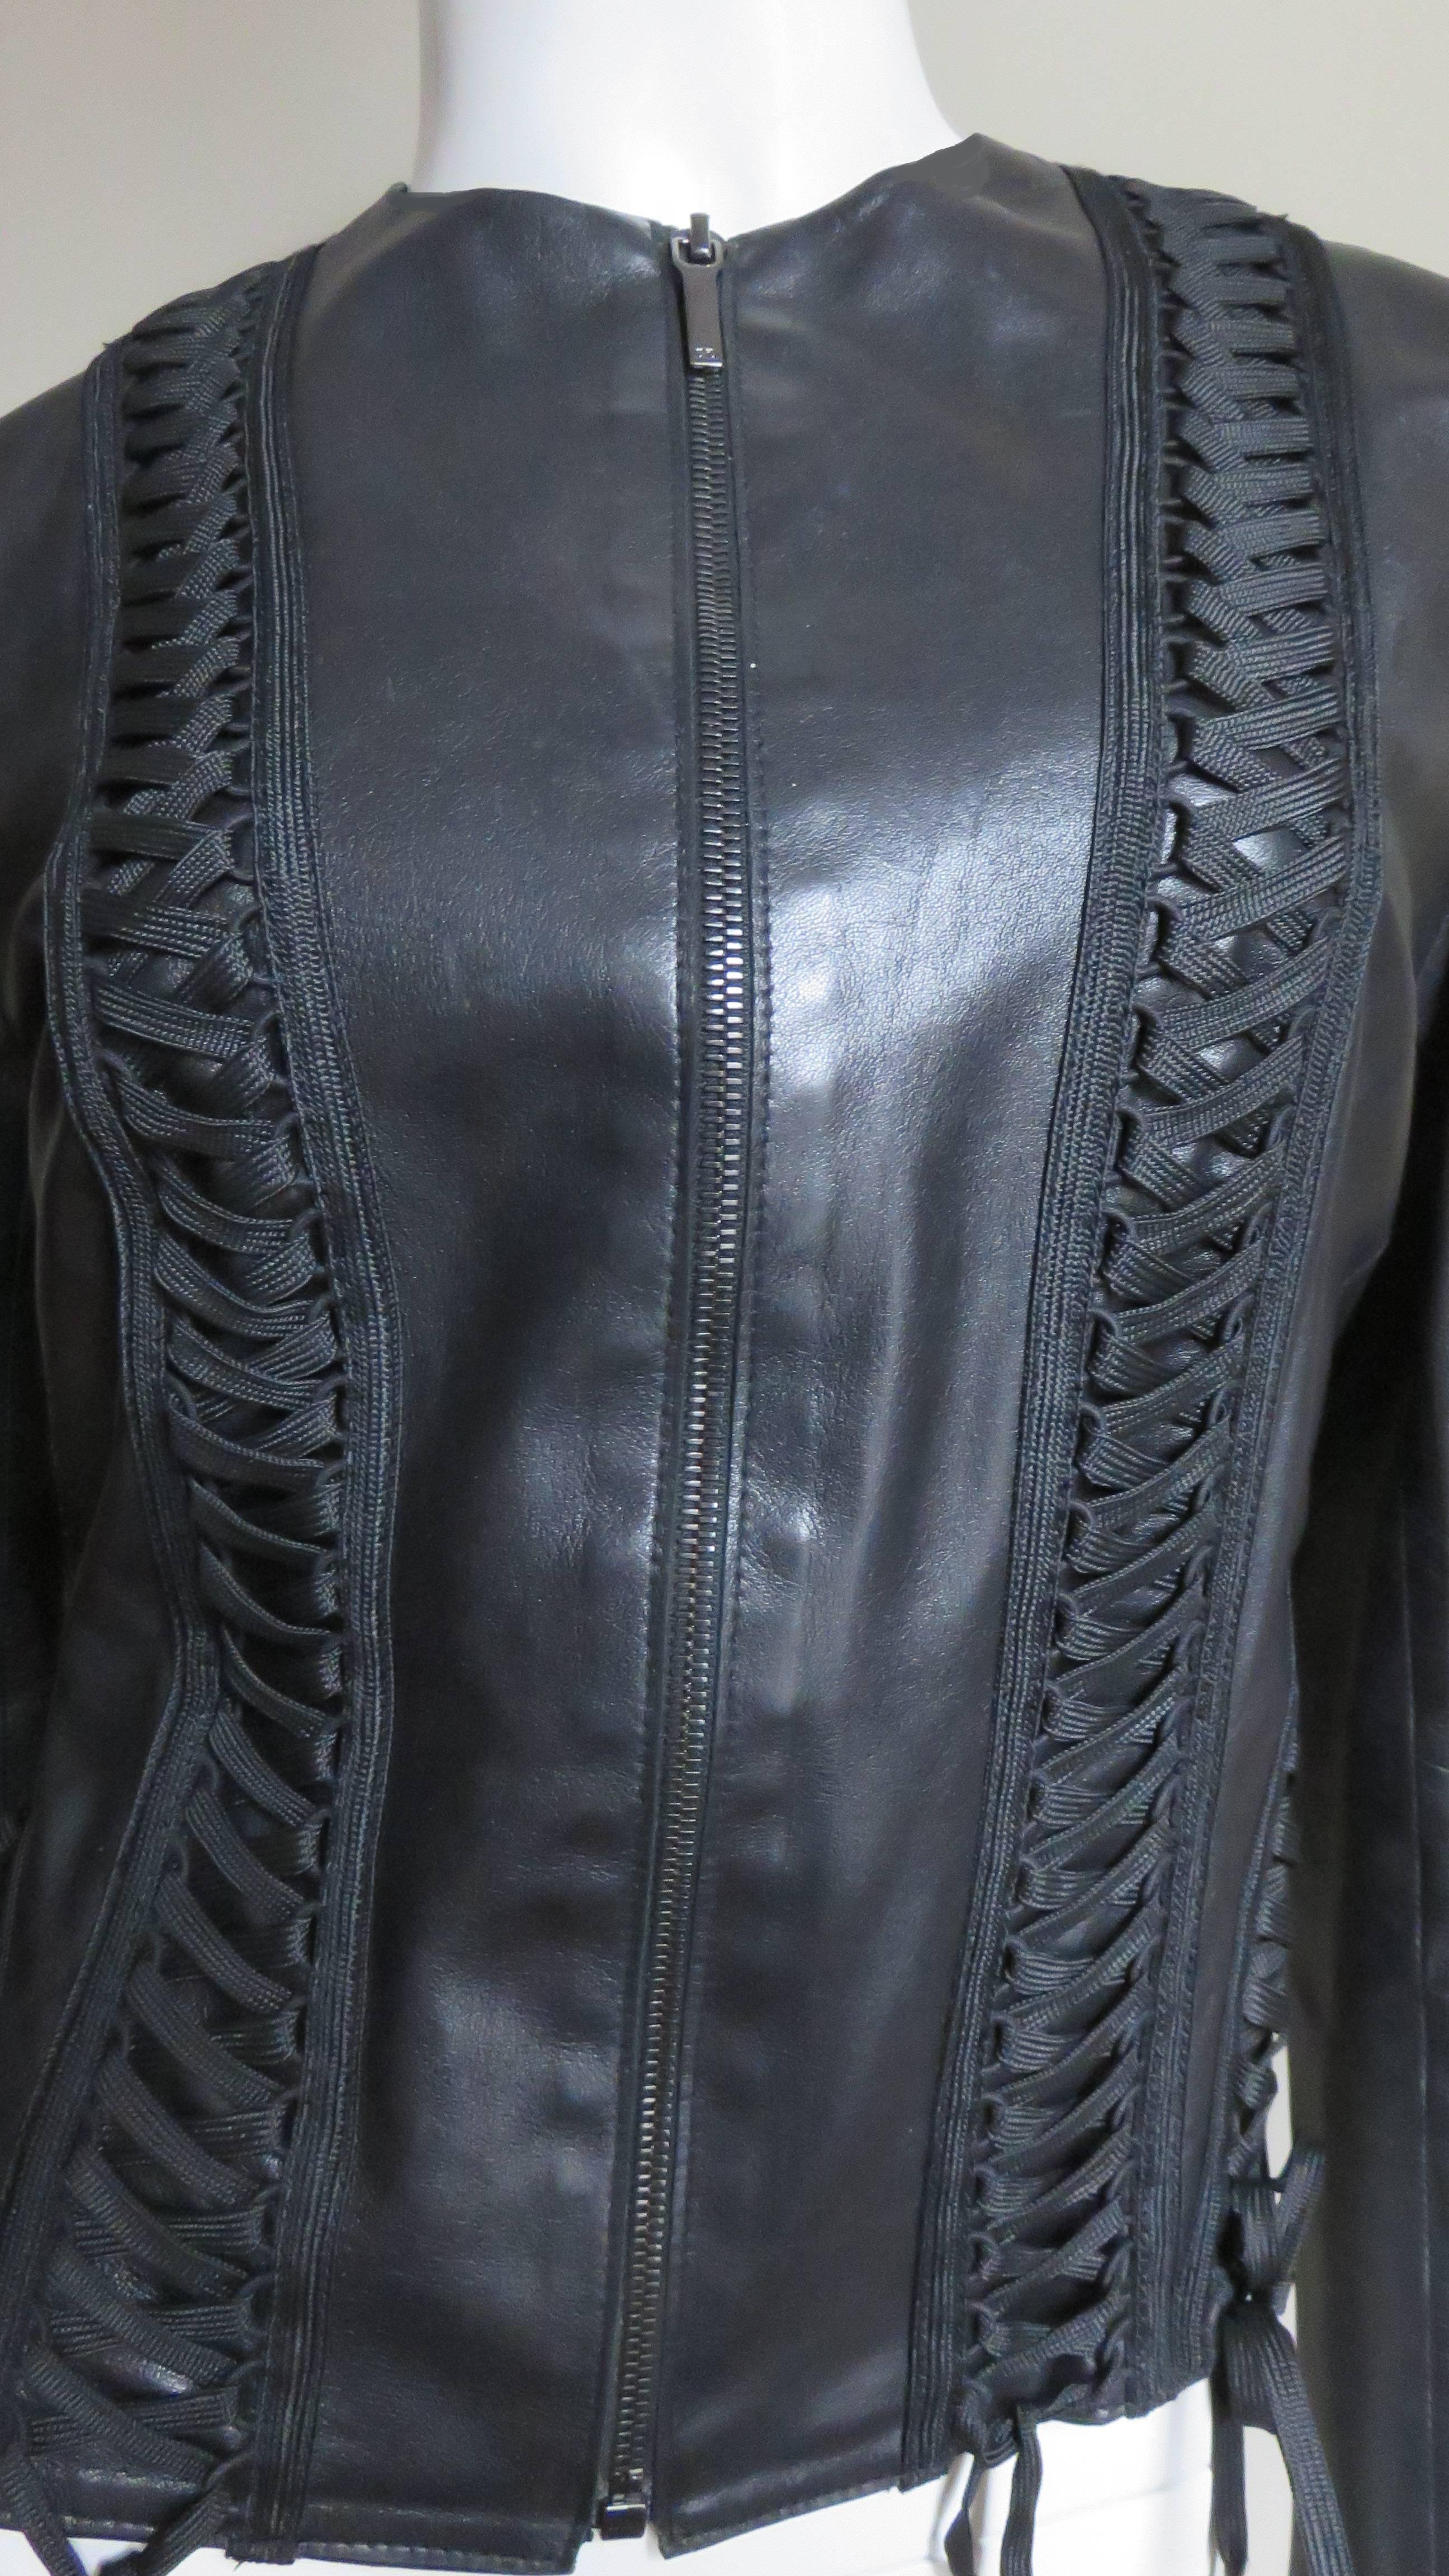 leather jacket with lace